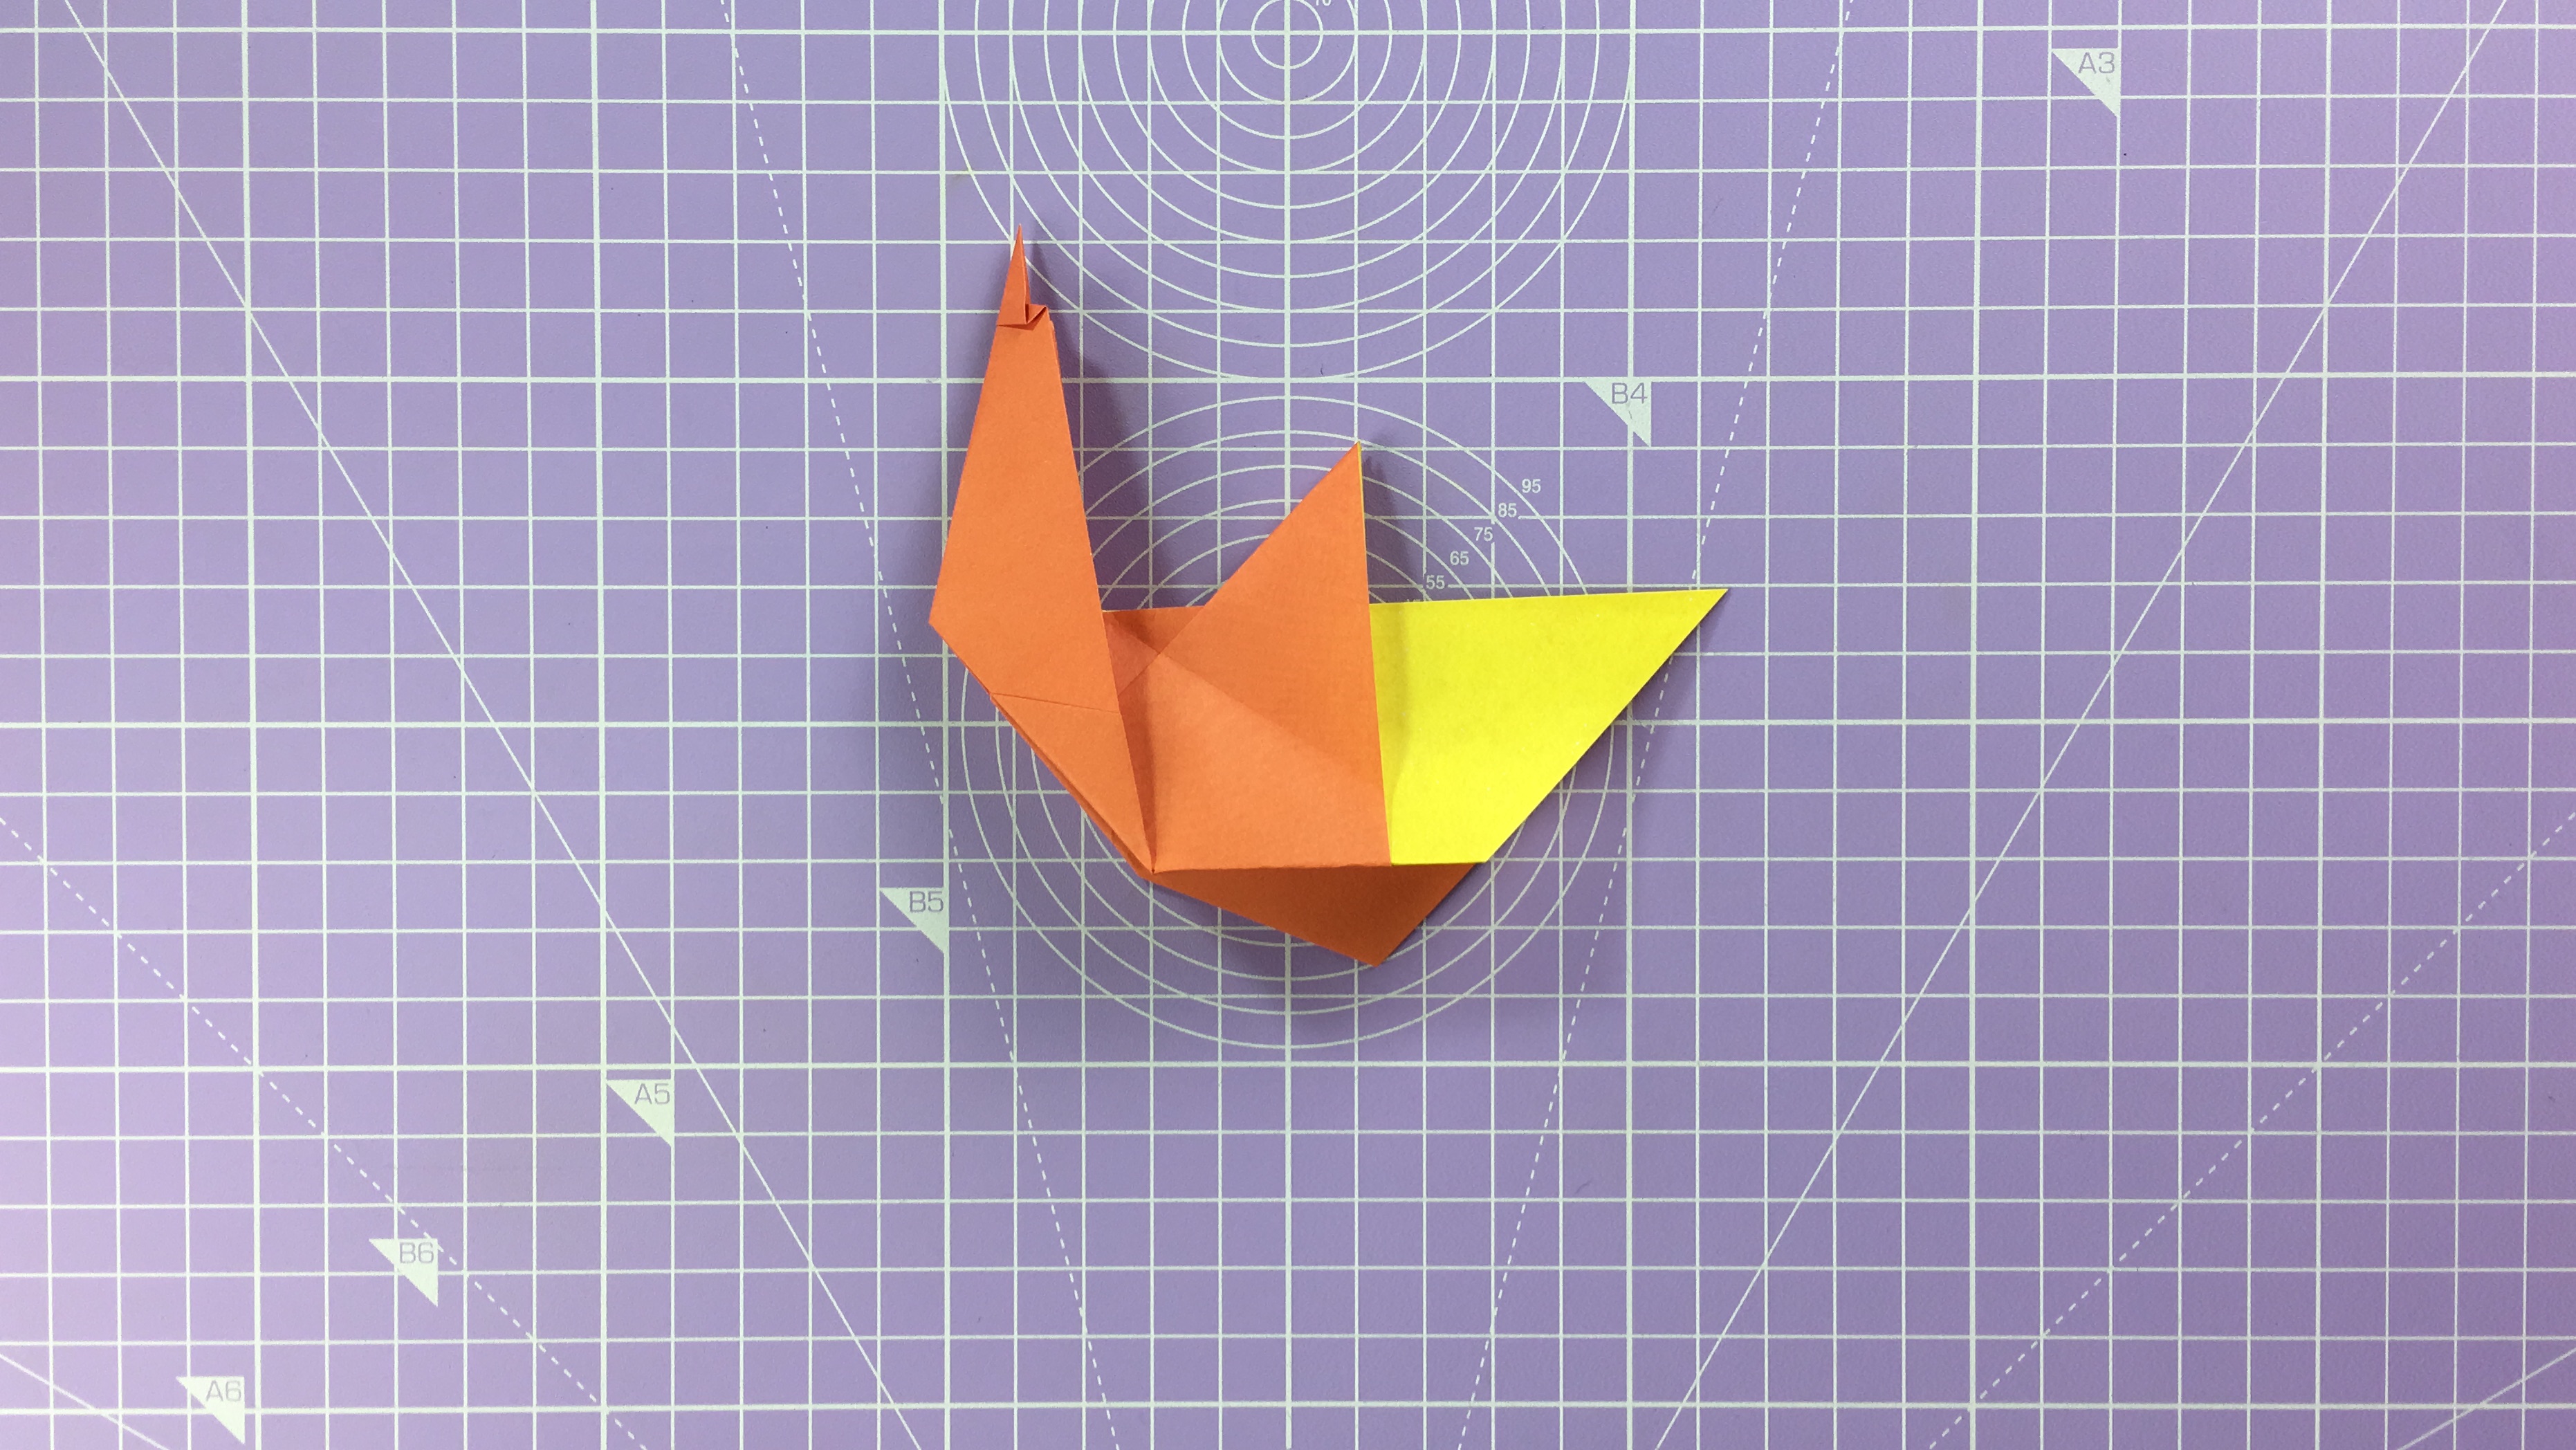 How to make an origami duck - step 13a